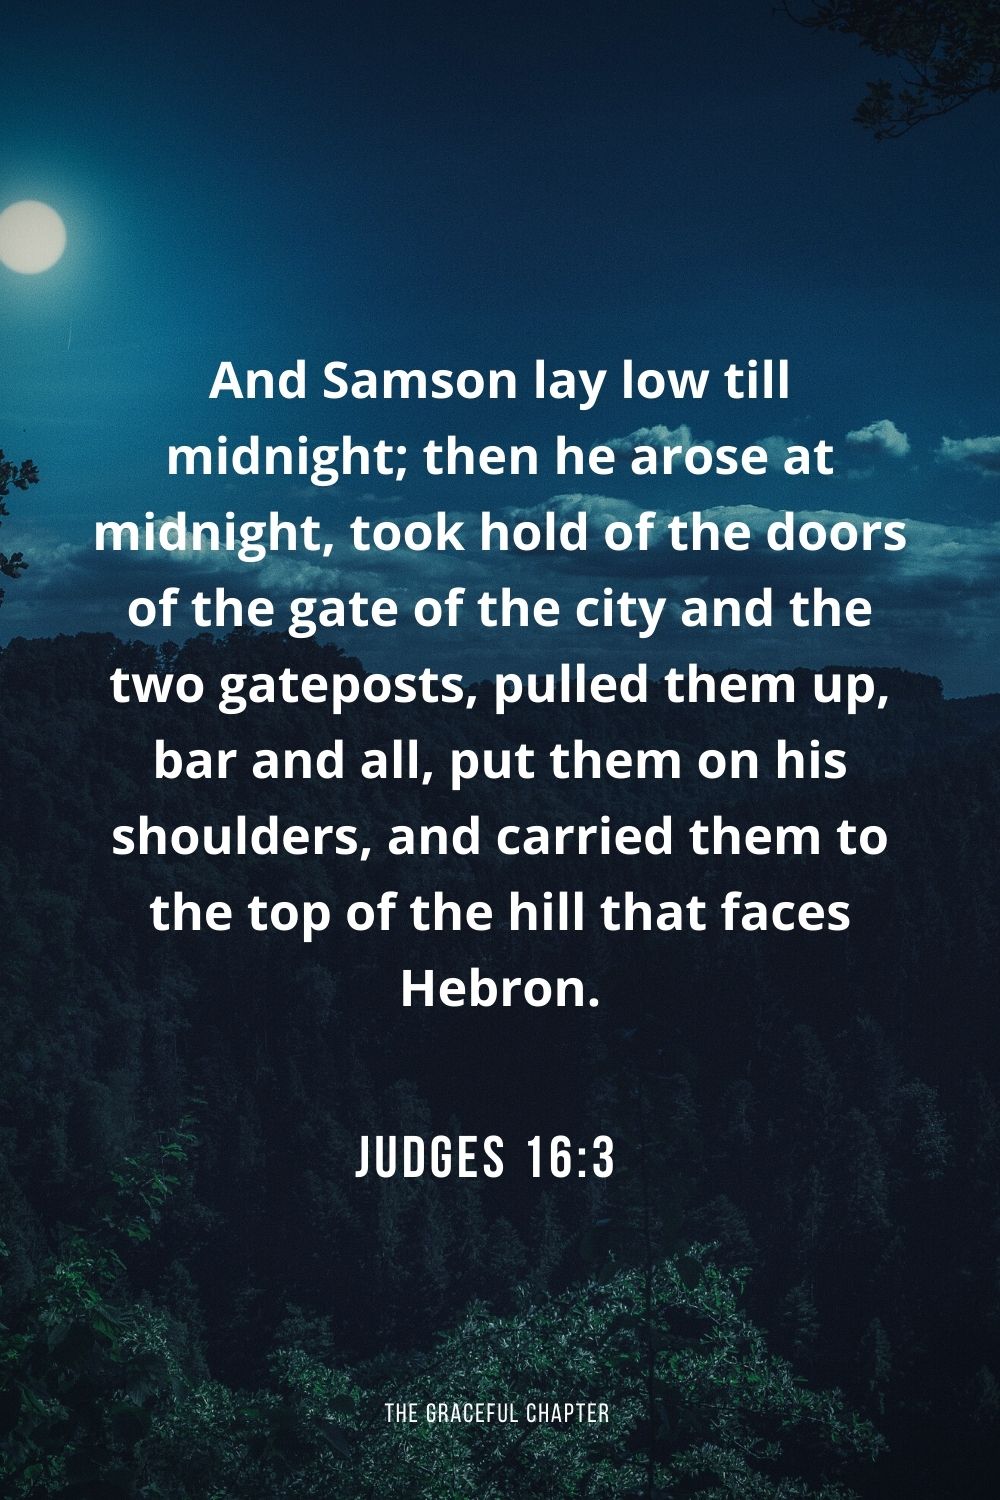 And Samson lay low till midnight; then he arose at midnight, took hold of the doors of the gate of the city and the two gateposts, pulled them up, bar and all, put them on his shoulders, and carried them to the top of the hill that faces Hebron. Judges 16:3